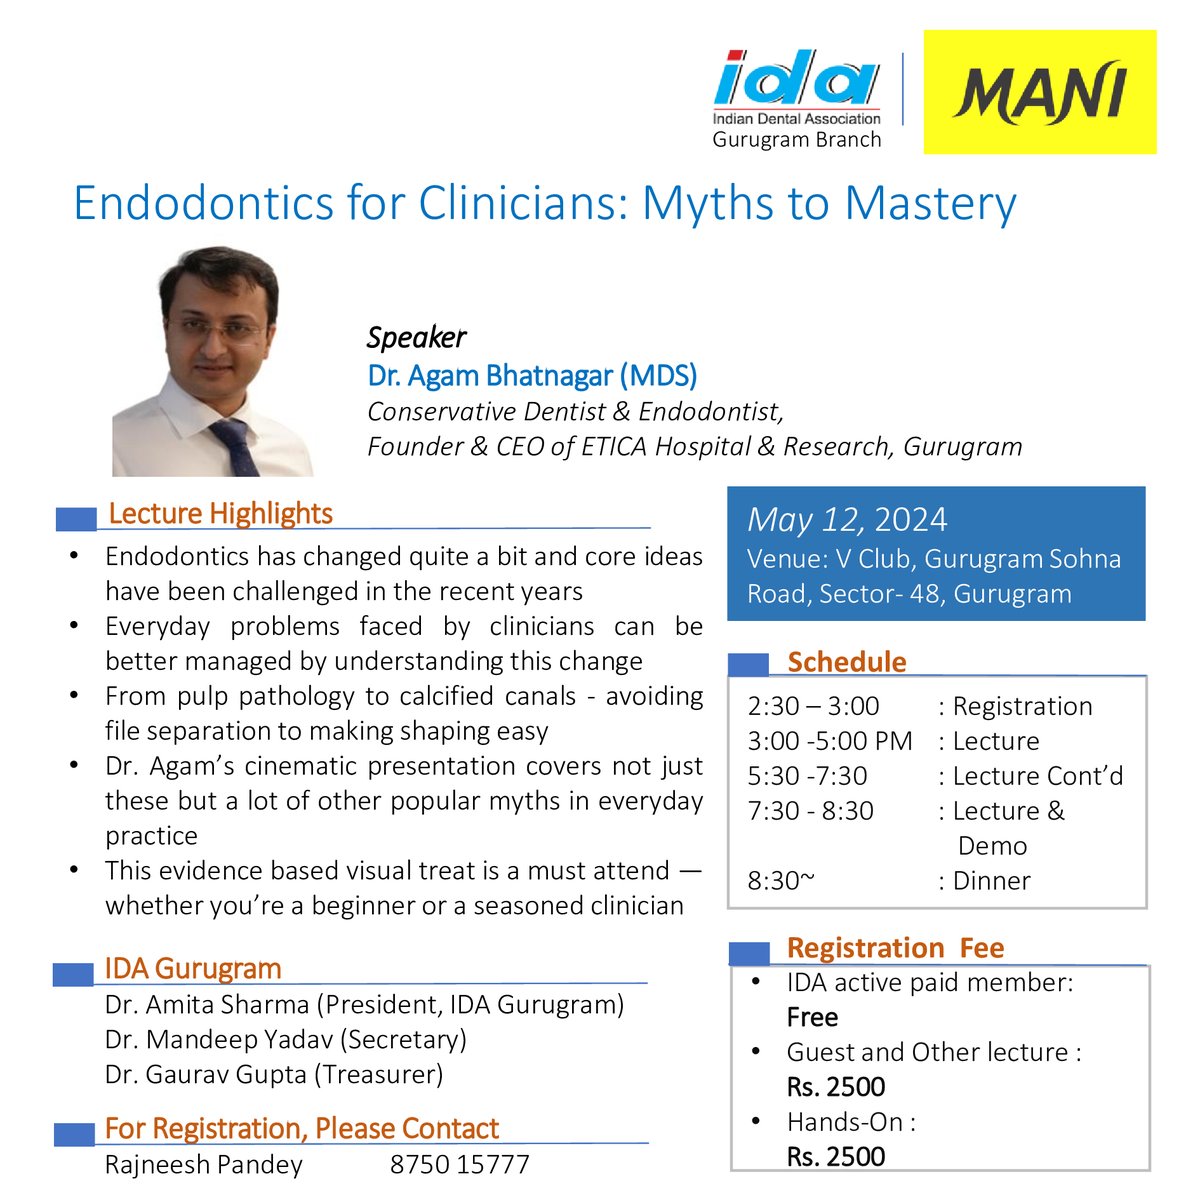 Join us for an upcoming CDE Rotary Workshop, 'Endodontics for Clinician: Myths to Mastery'.
📷Speaker : Dr. Agam Bhatnagar
📷May 12, 2024
📷V Club, Gurugram
'The Best Quality In the World, To The World.'
#MANI #JIZAI #RotaryFiles #Endodontics #Endodontist #CDE #DentalEducation